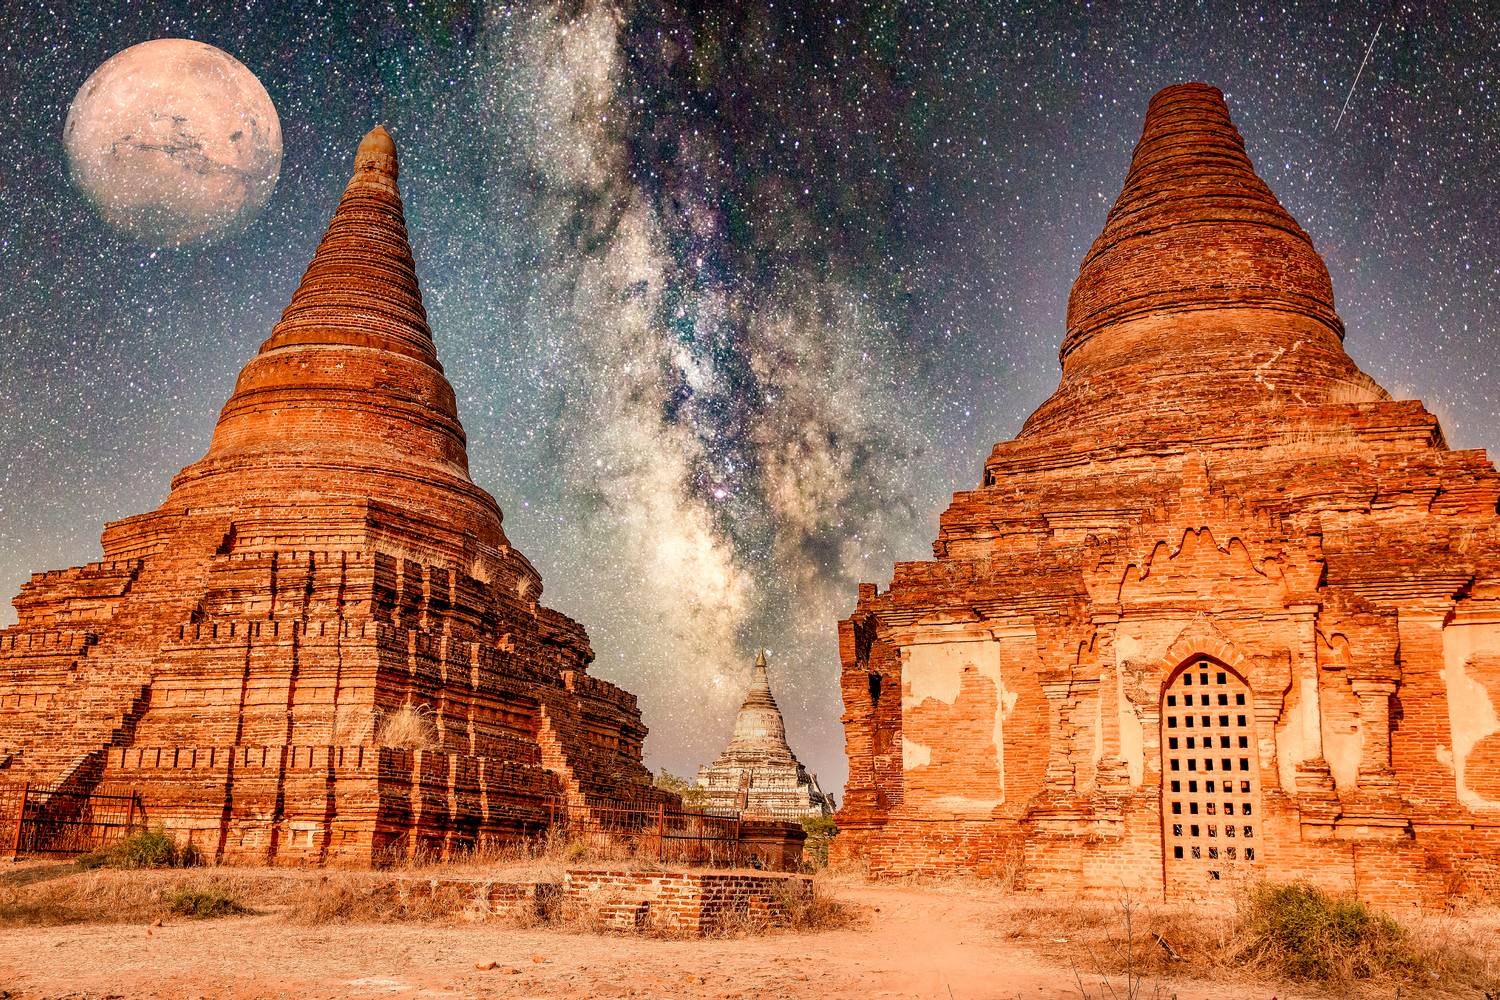 Myanmar in Space, Tempel, Himmel und Mond  from Miro May